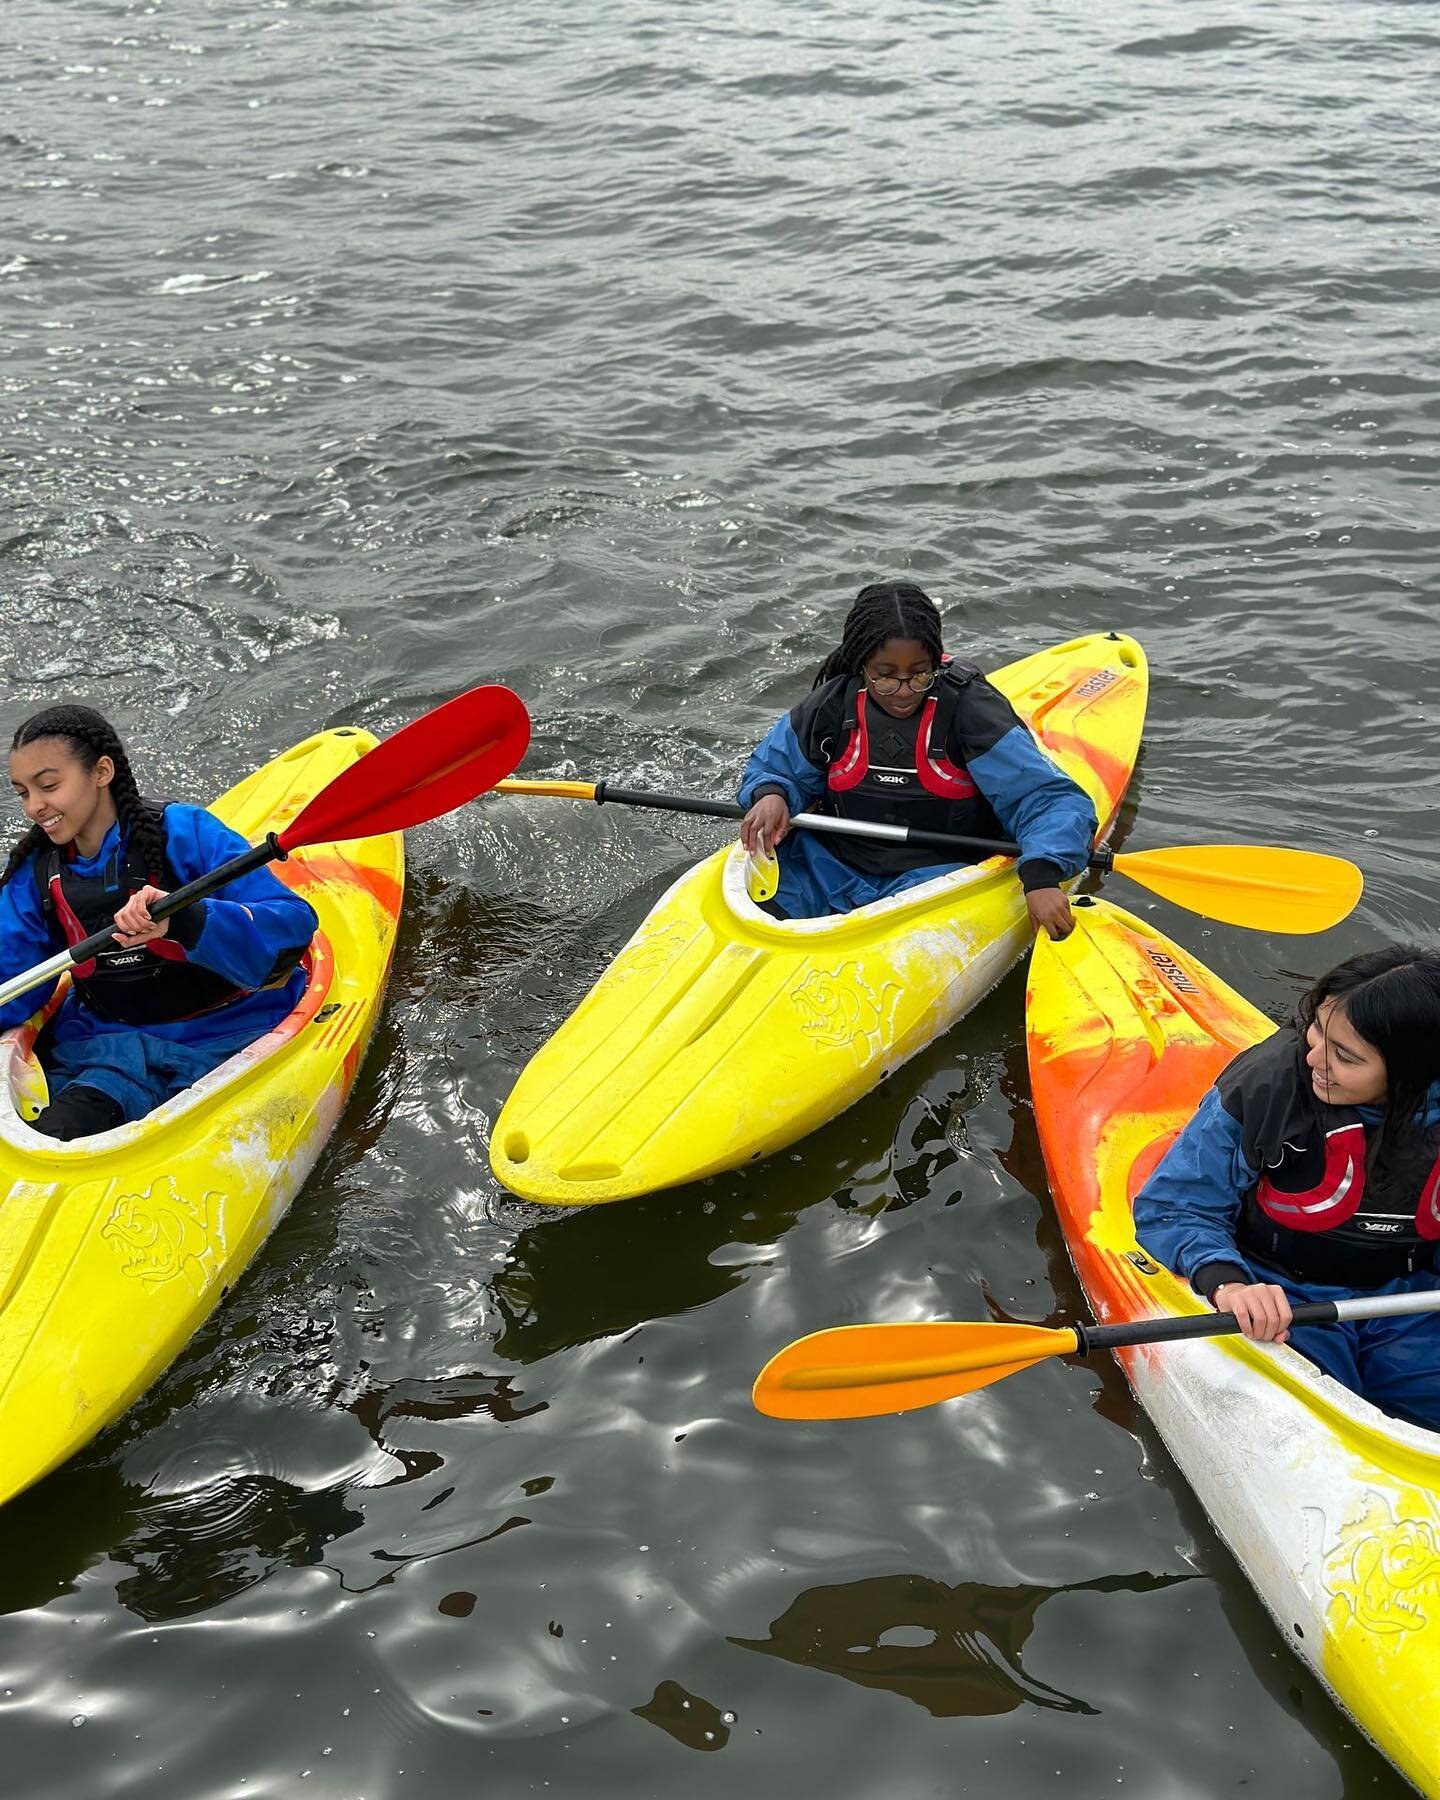 Easter Holidays Activities ✅ 

Well done to all our participants who smashed through the workshops and activities that were on offer. 

Thank you to the @seacadetsuk for the kayaking sessions as we gear up to take on the London Youth Games.

Shout ou